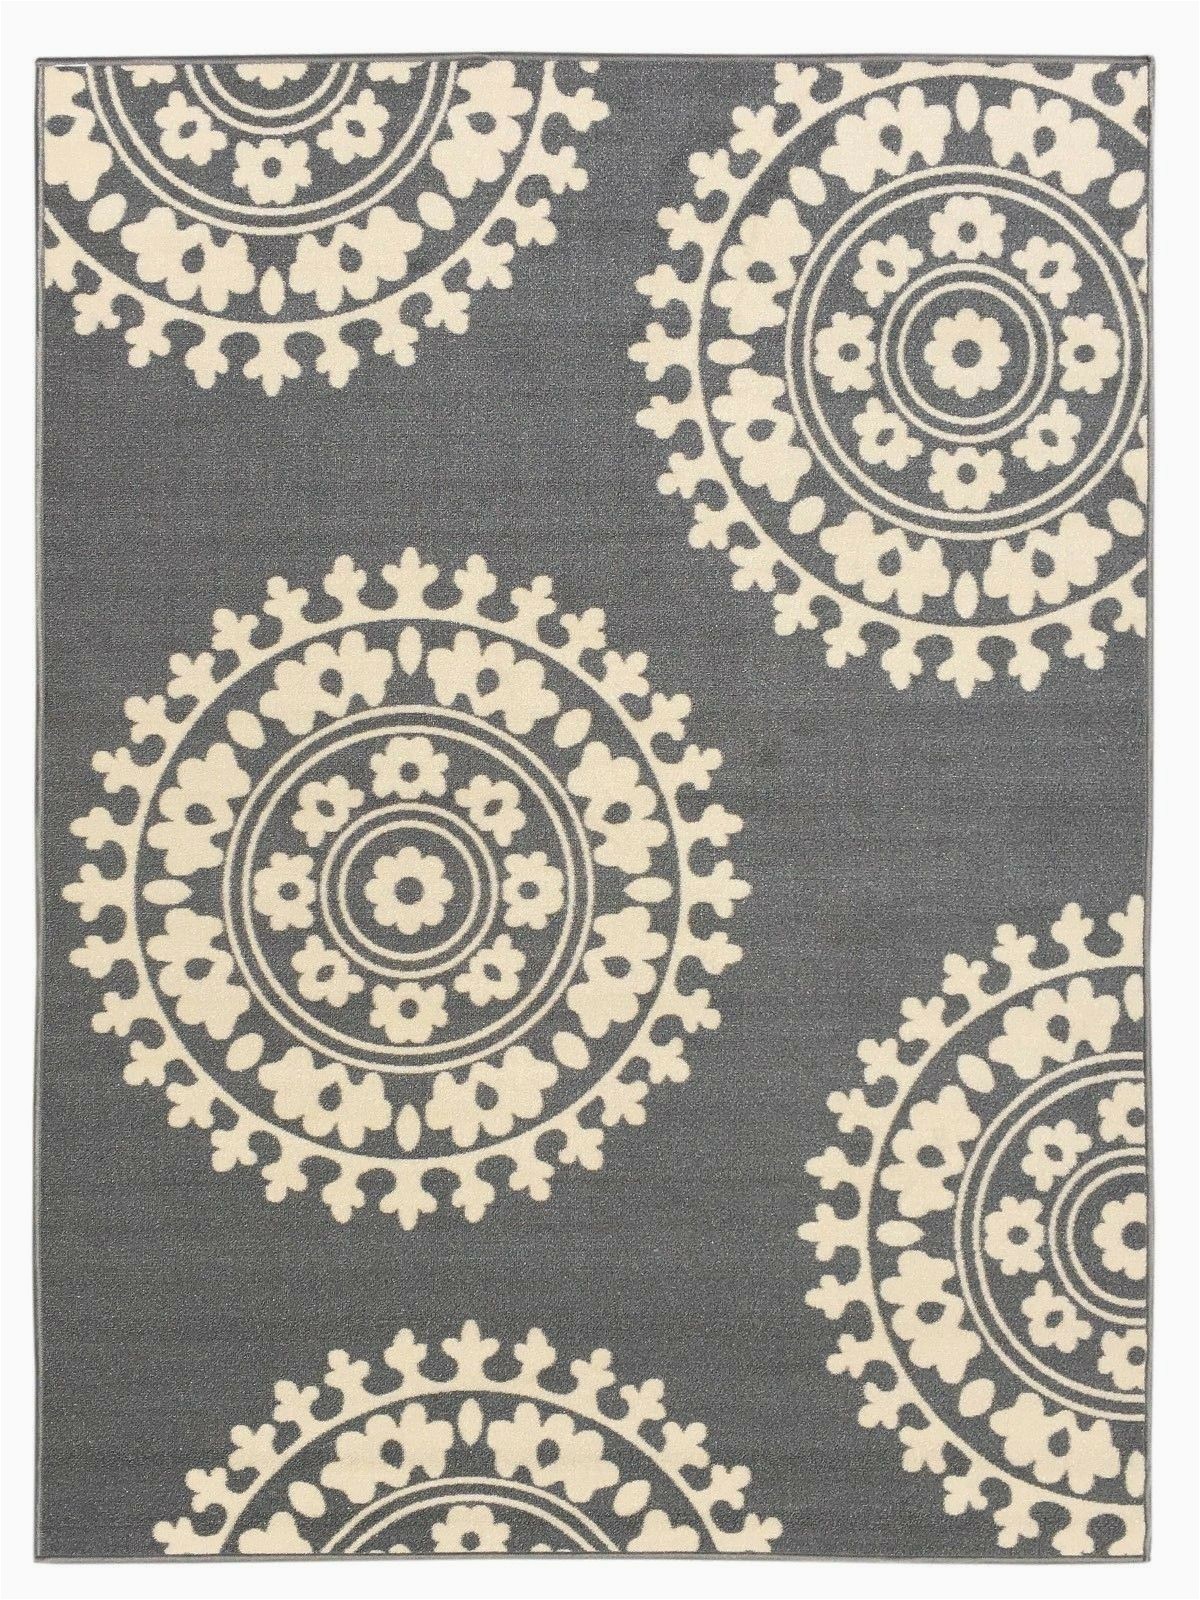 Rubber Backed area Rugs 4×6 Rubber Backed Non Skid Non Slip Gray Ivory Color Medallion Design area Rug